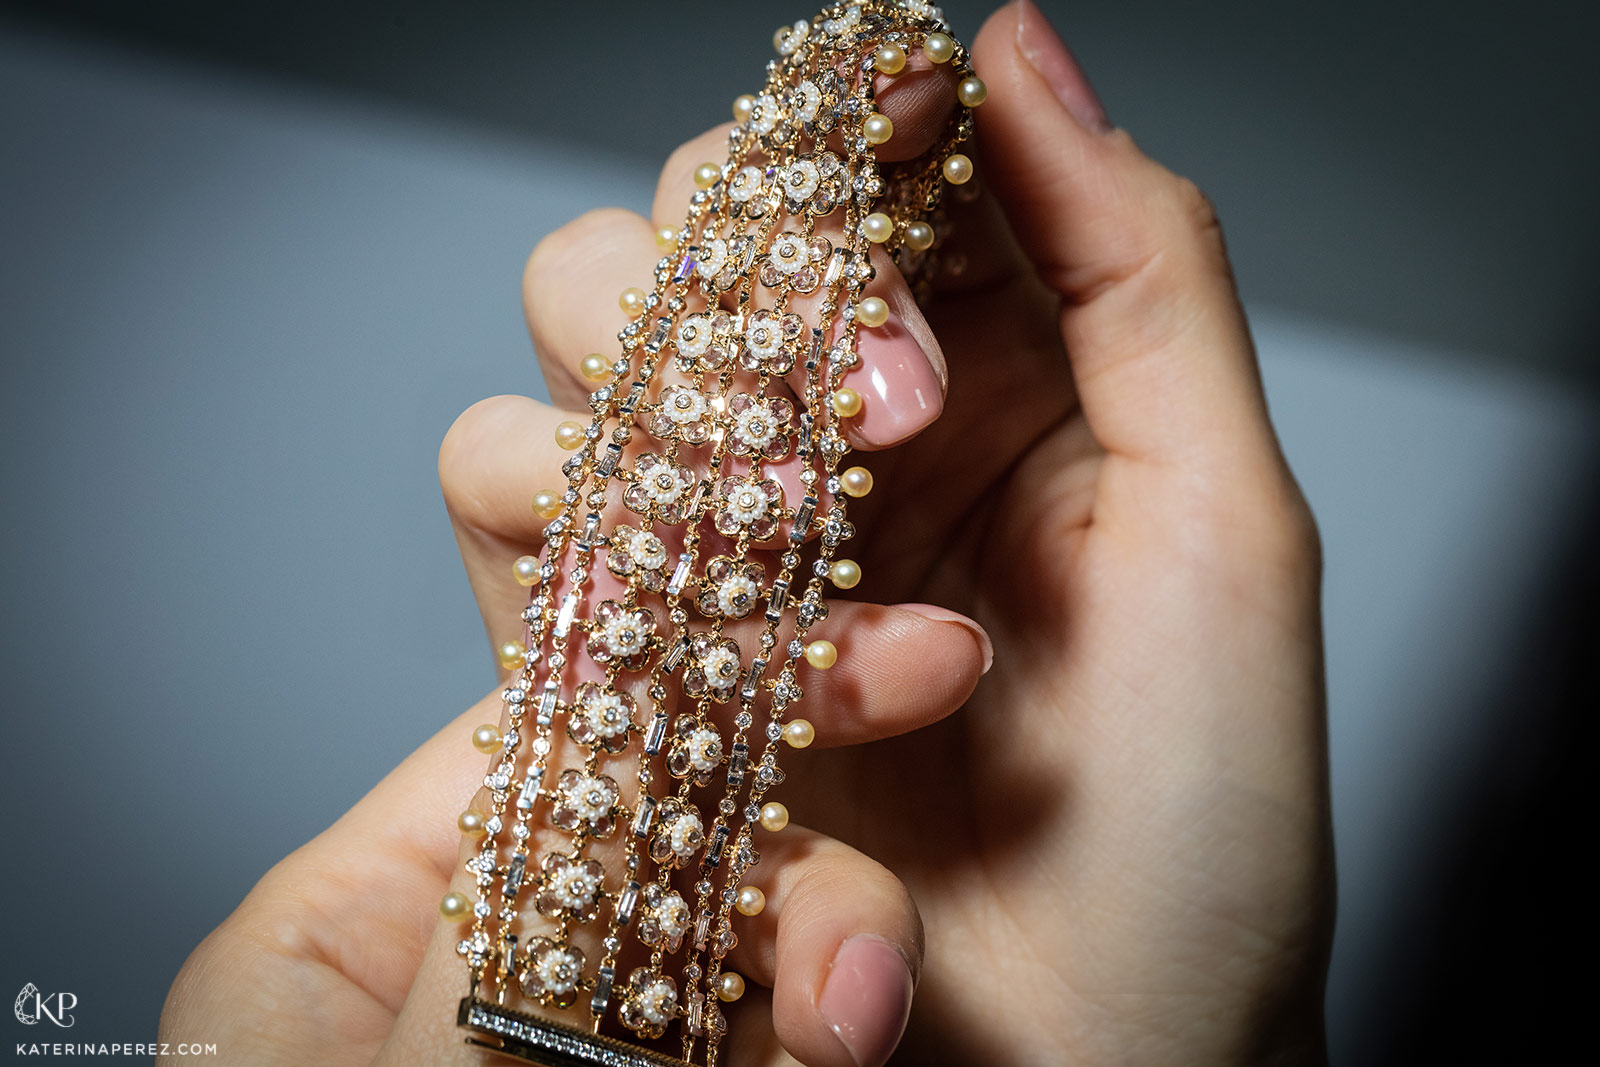 Moksh 'Empress' bracelet with 400 pearls and a total of more than 9ct diamonds in yellow gold